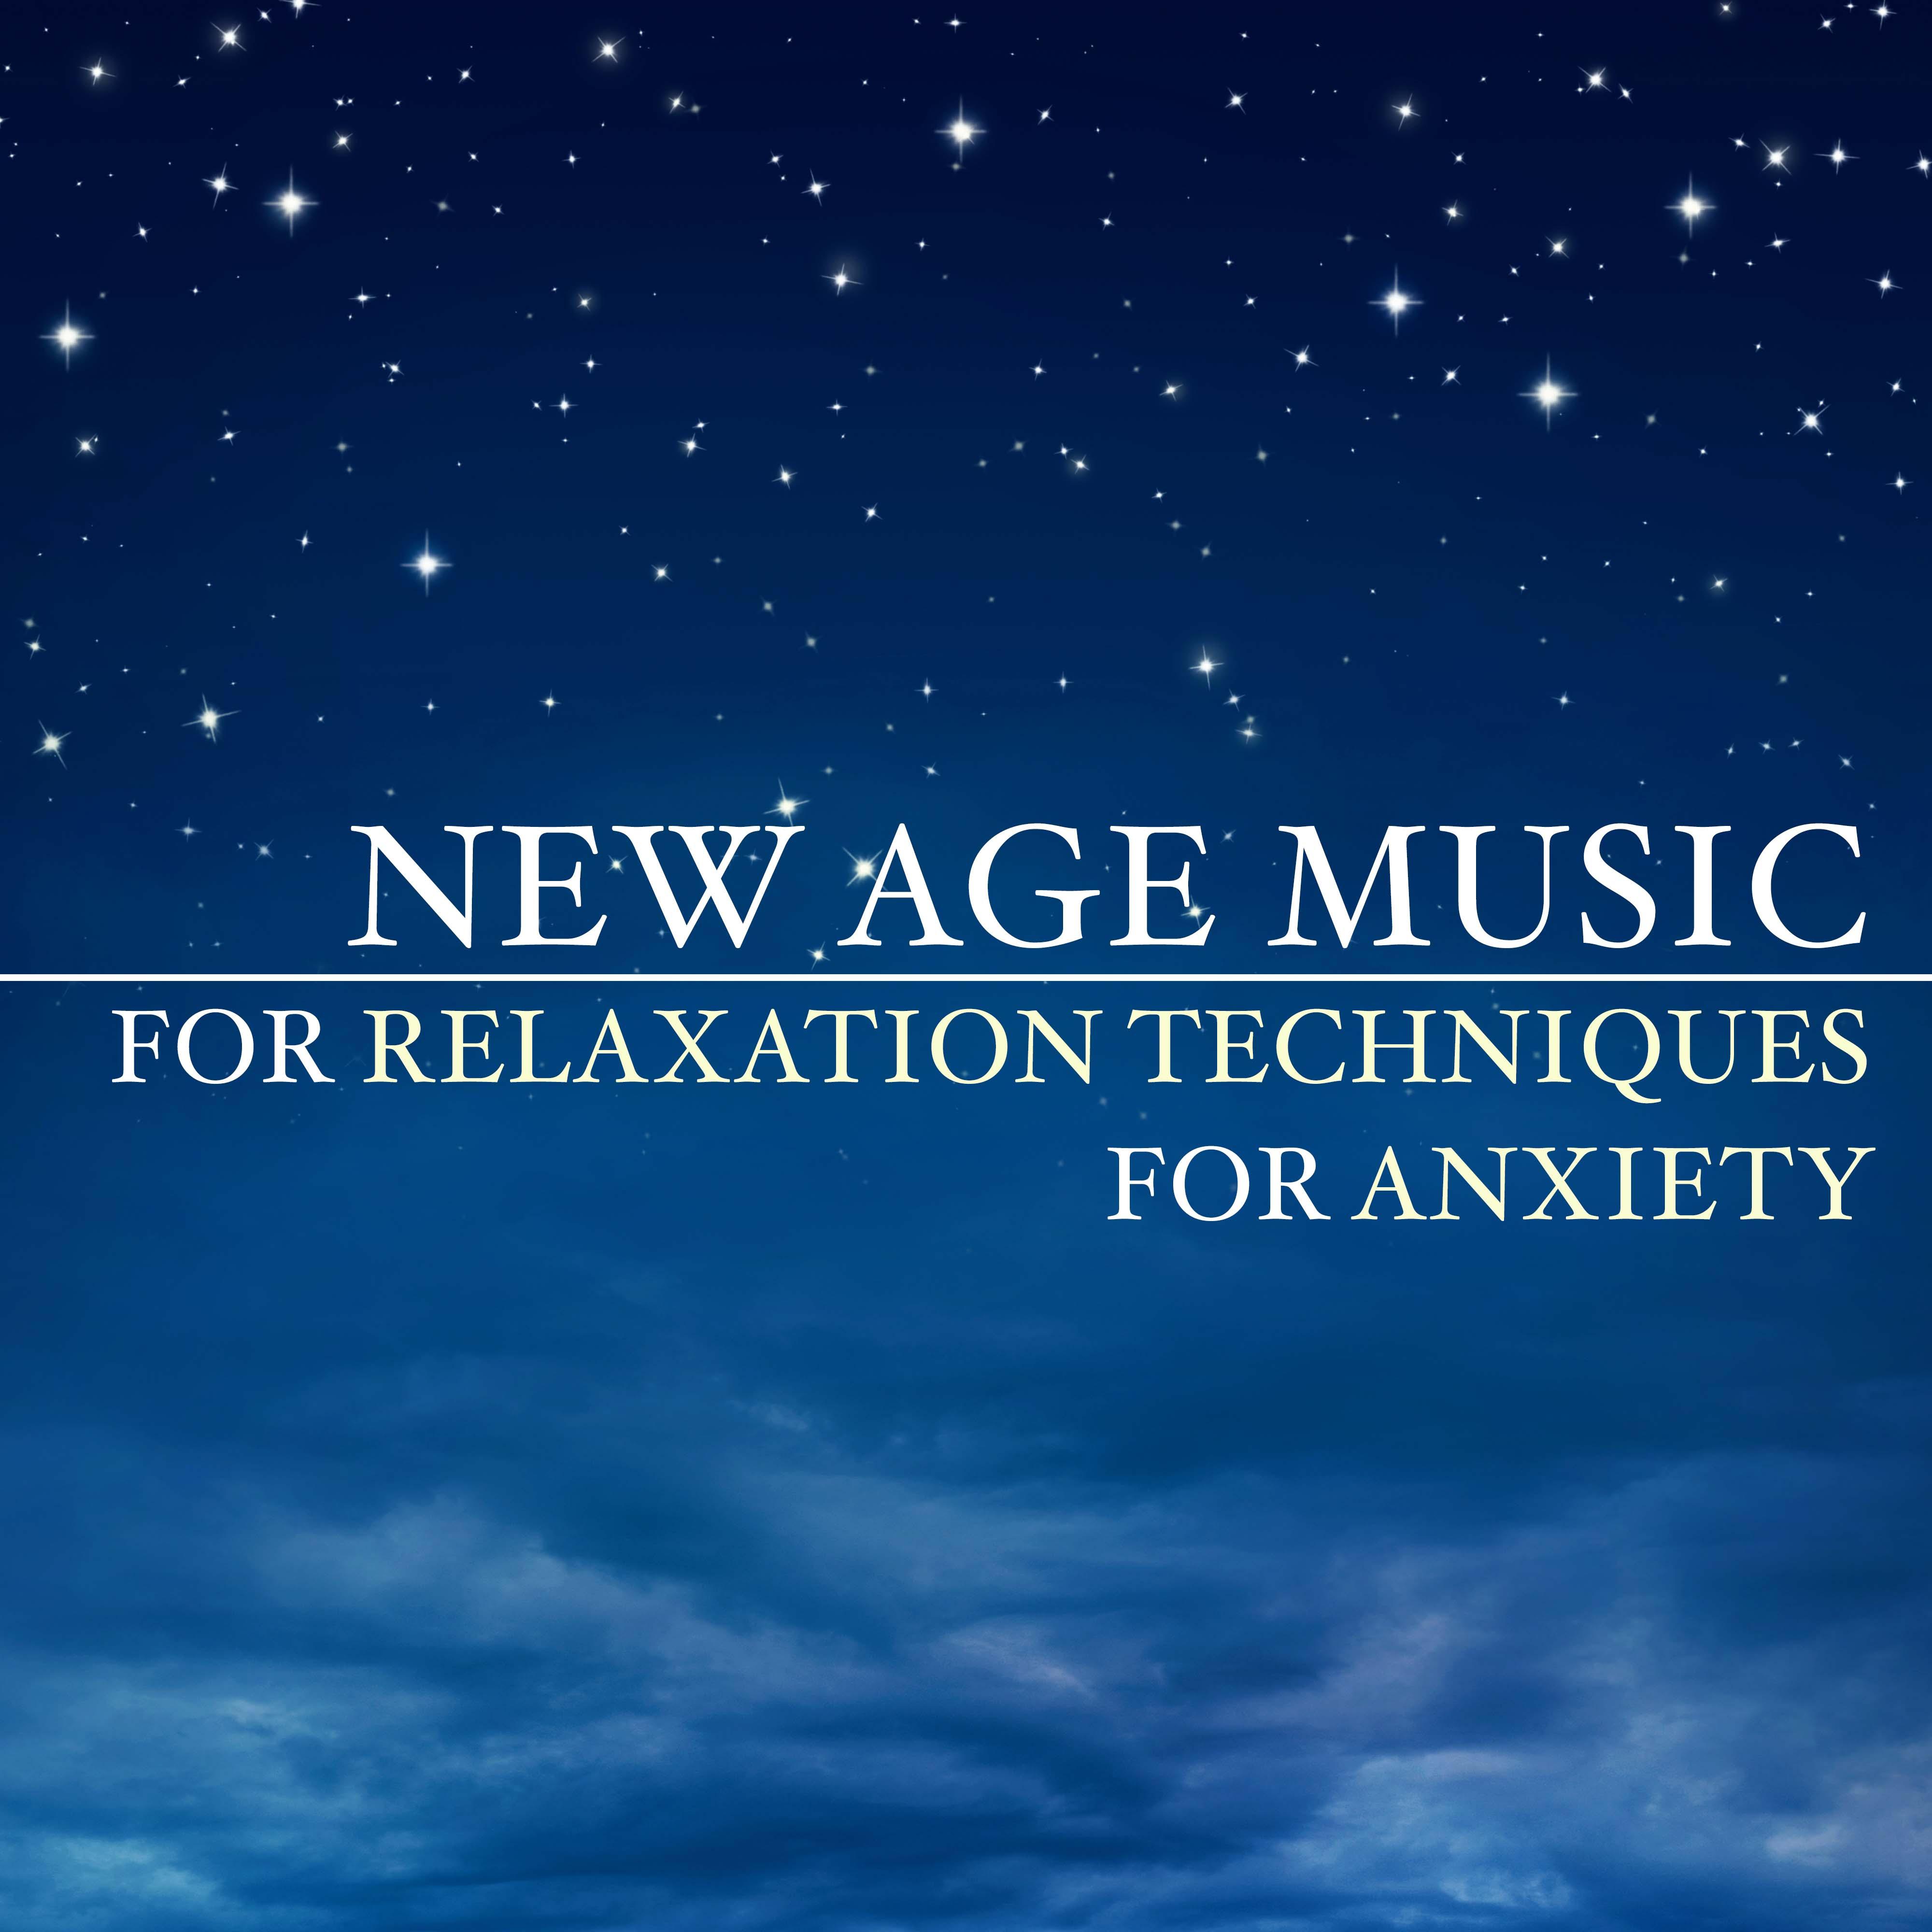 New Age Music for Relaxation Techniques for Anxiety